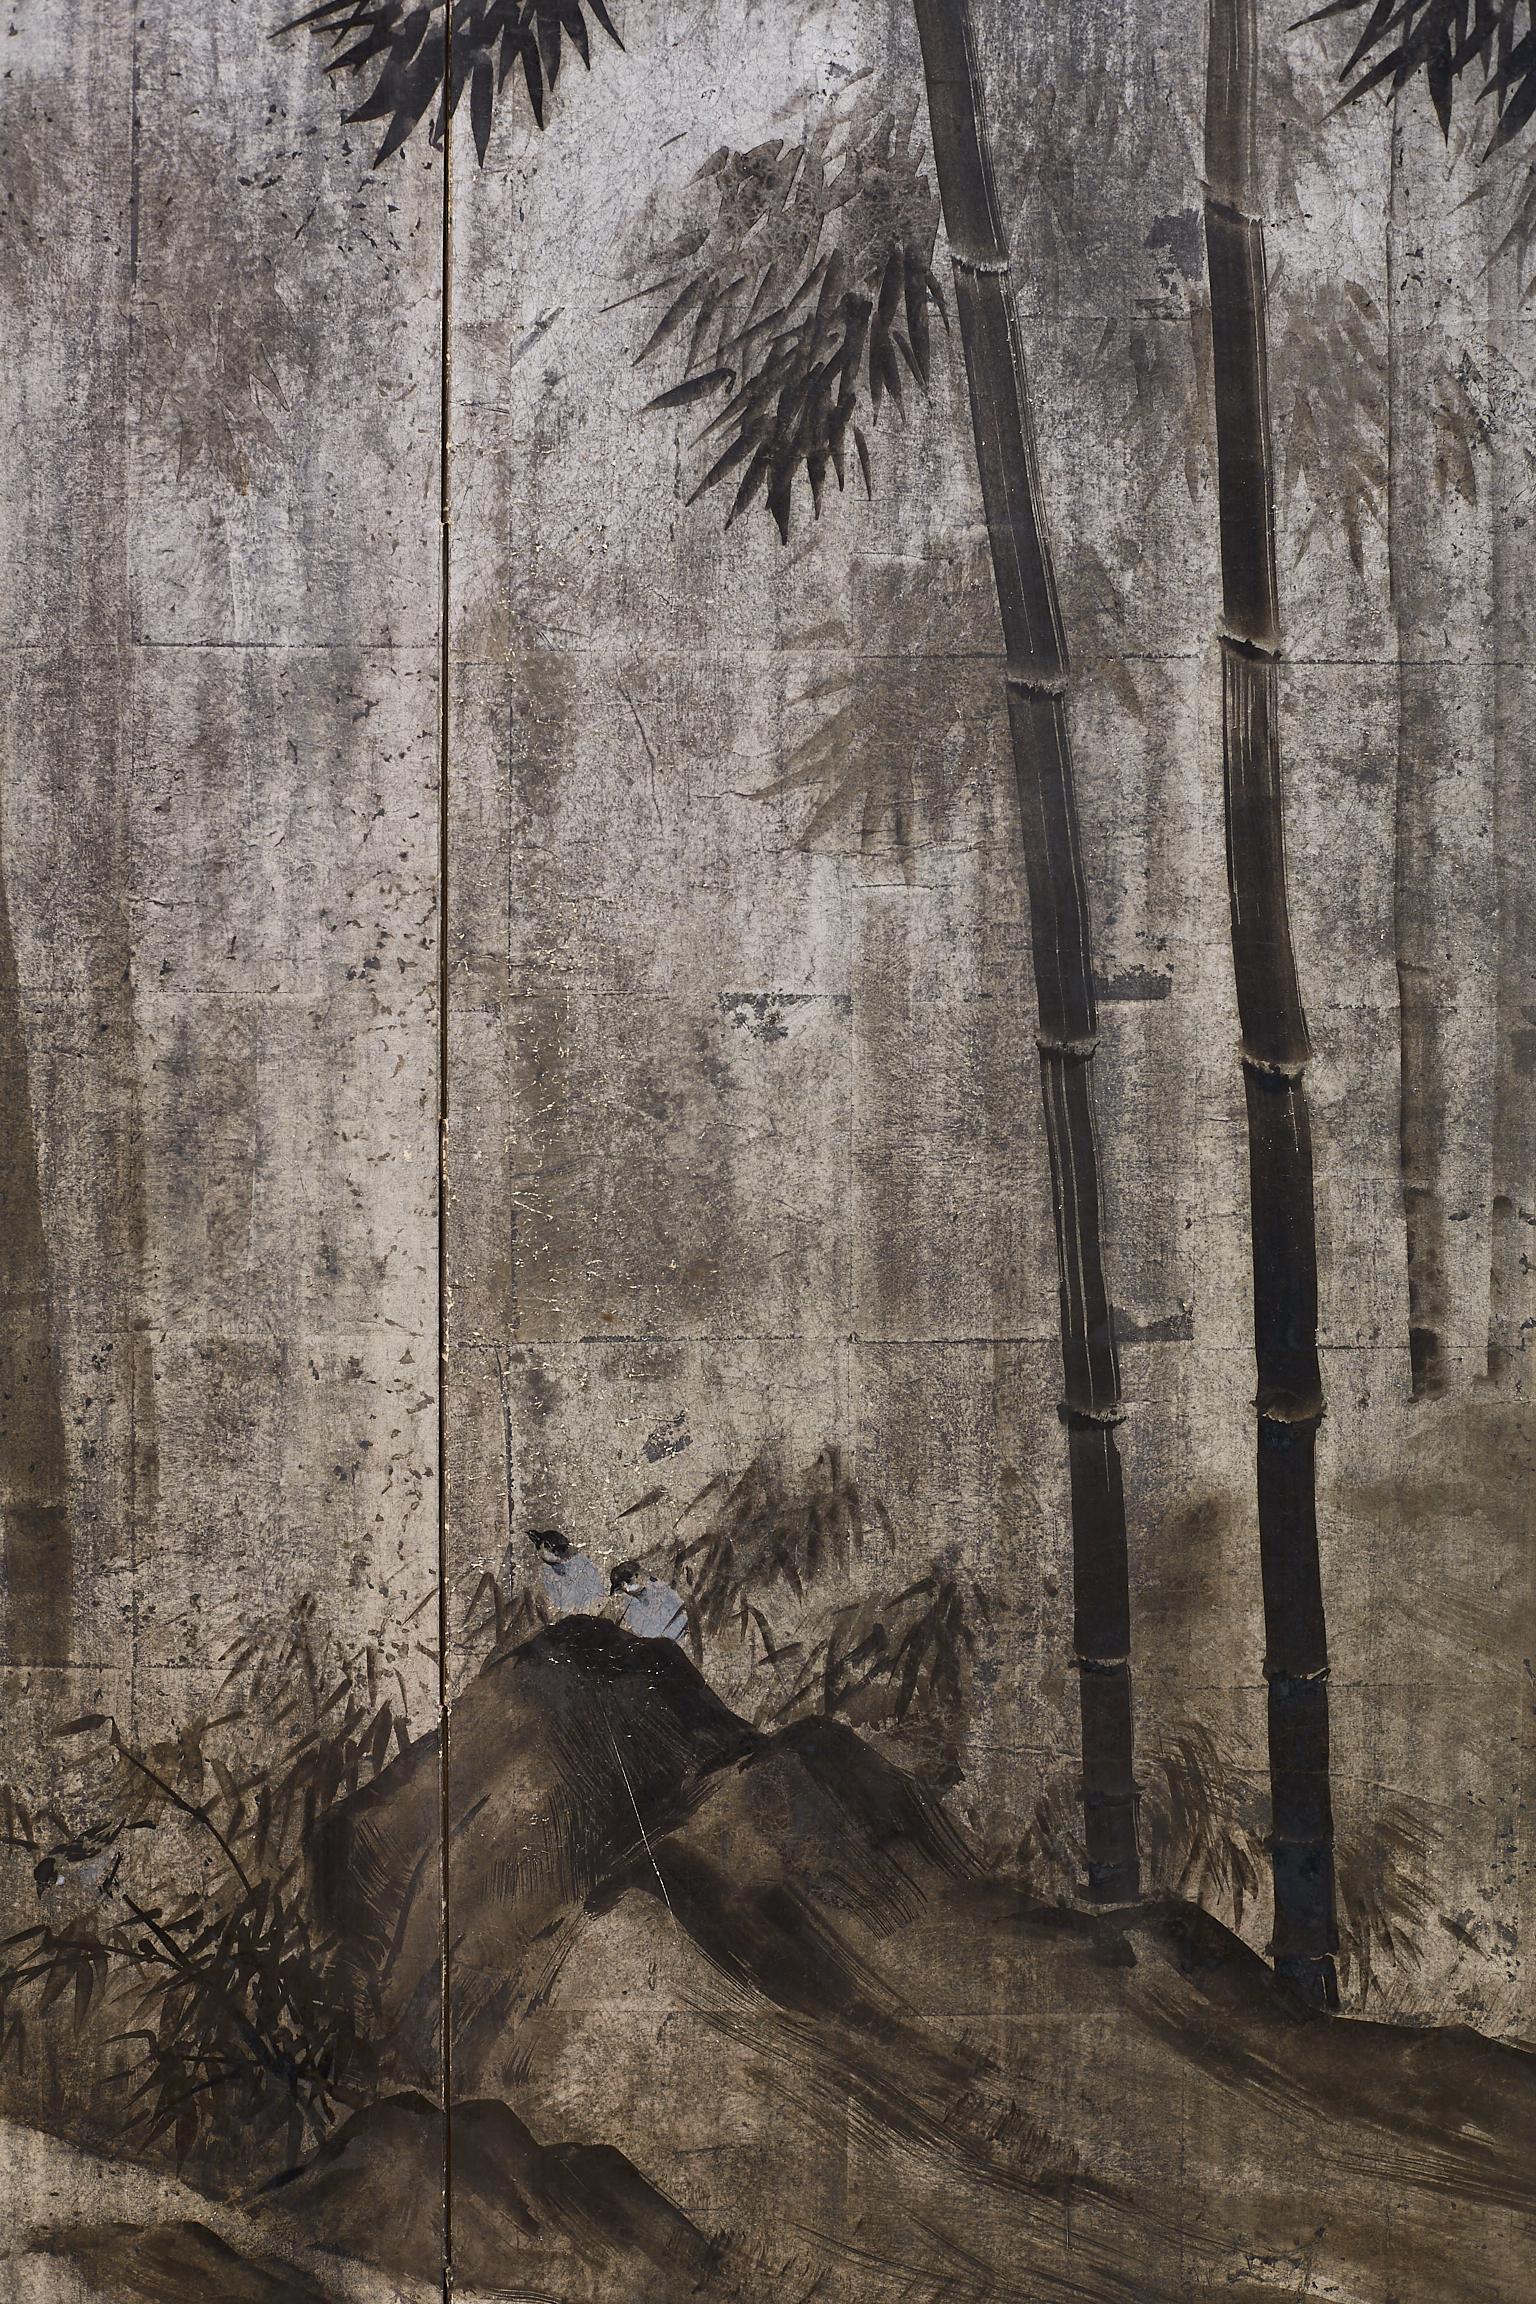 Rare Japanese Meiji period screen with Sumi-e ink on squares of silver leaf. Features a dark bamboo forest with quail. Sumi-e is the ancient art of Japanese monochromatic ink painting that has its origins in Chinese calligraphy. Set in an ebonized